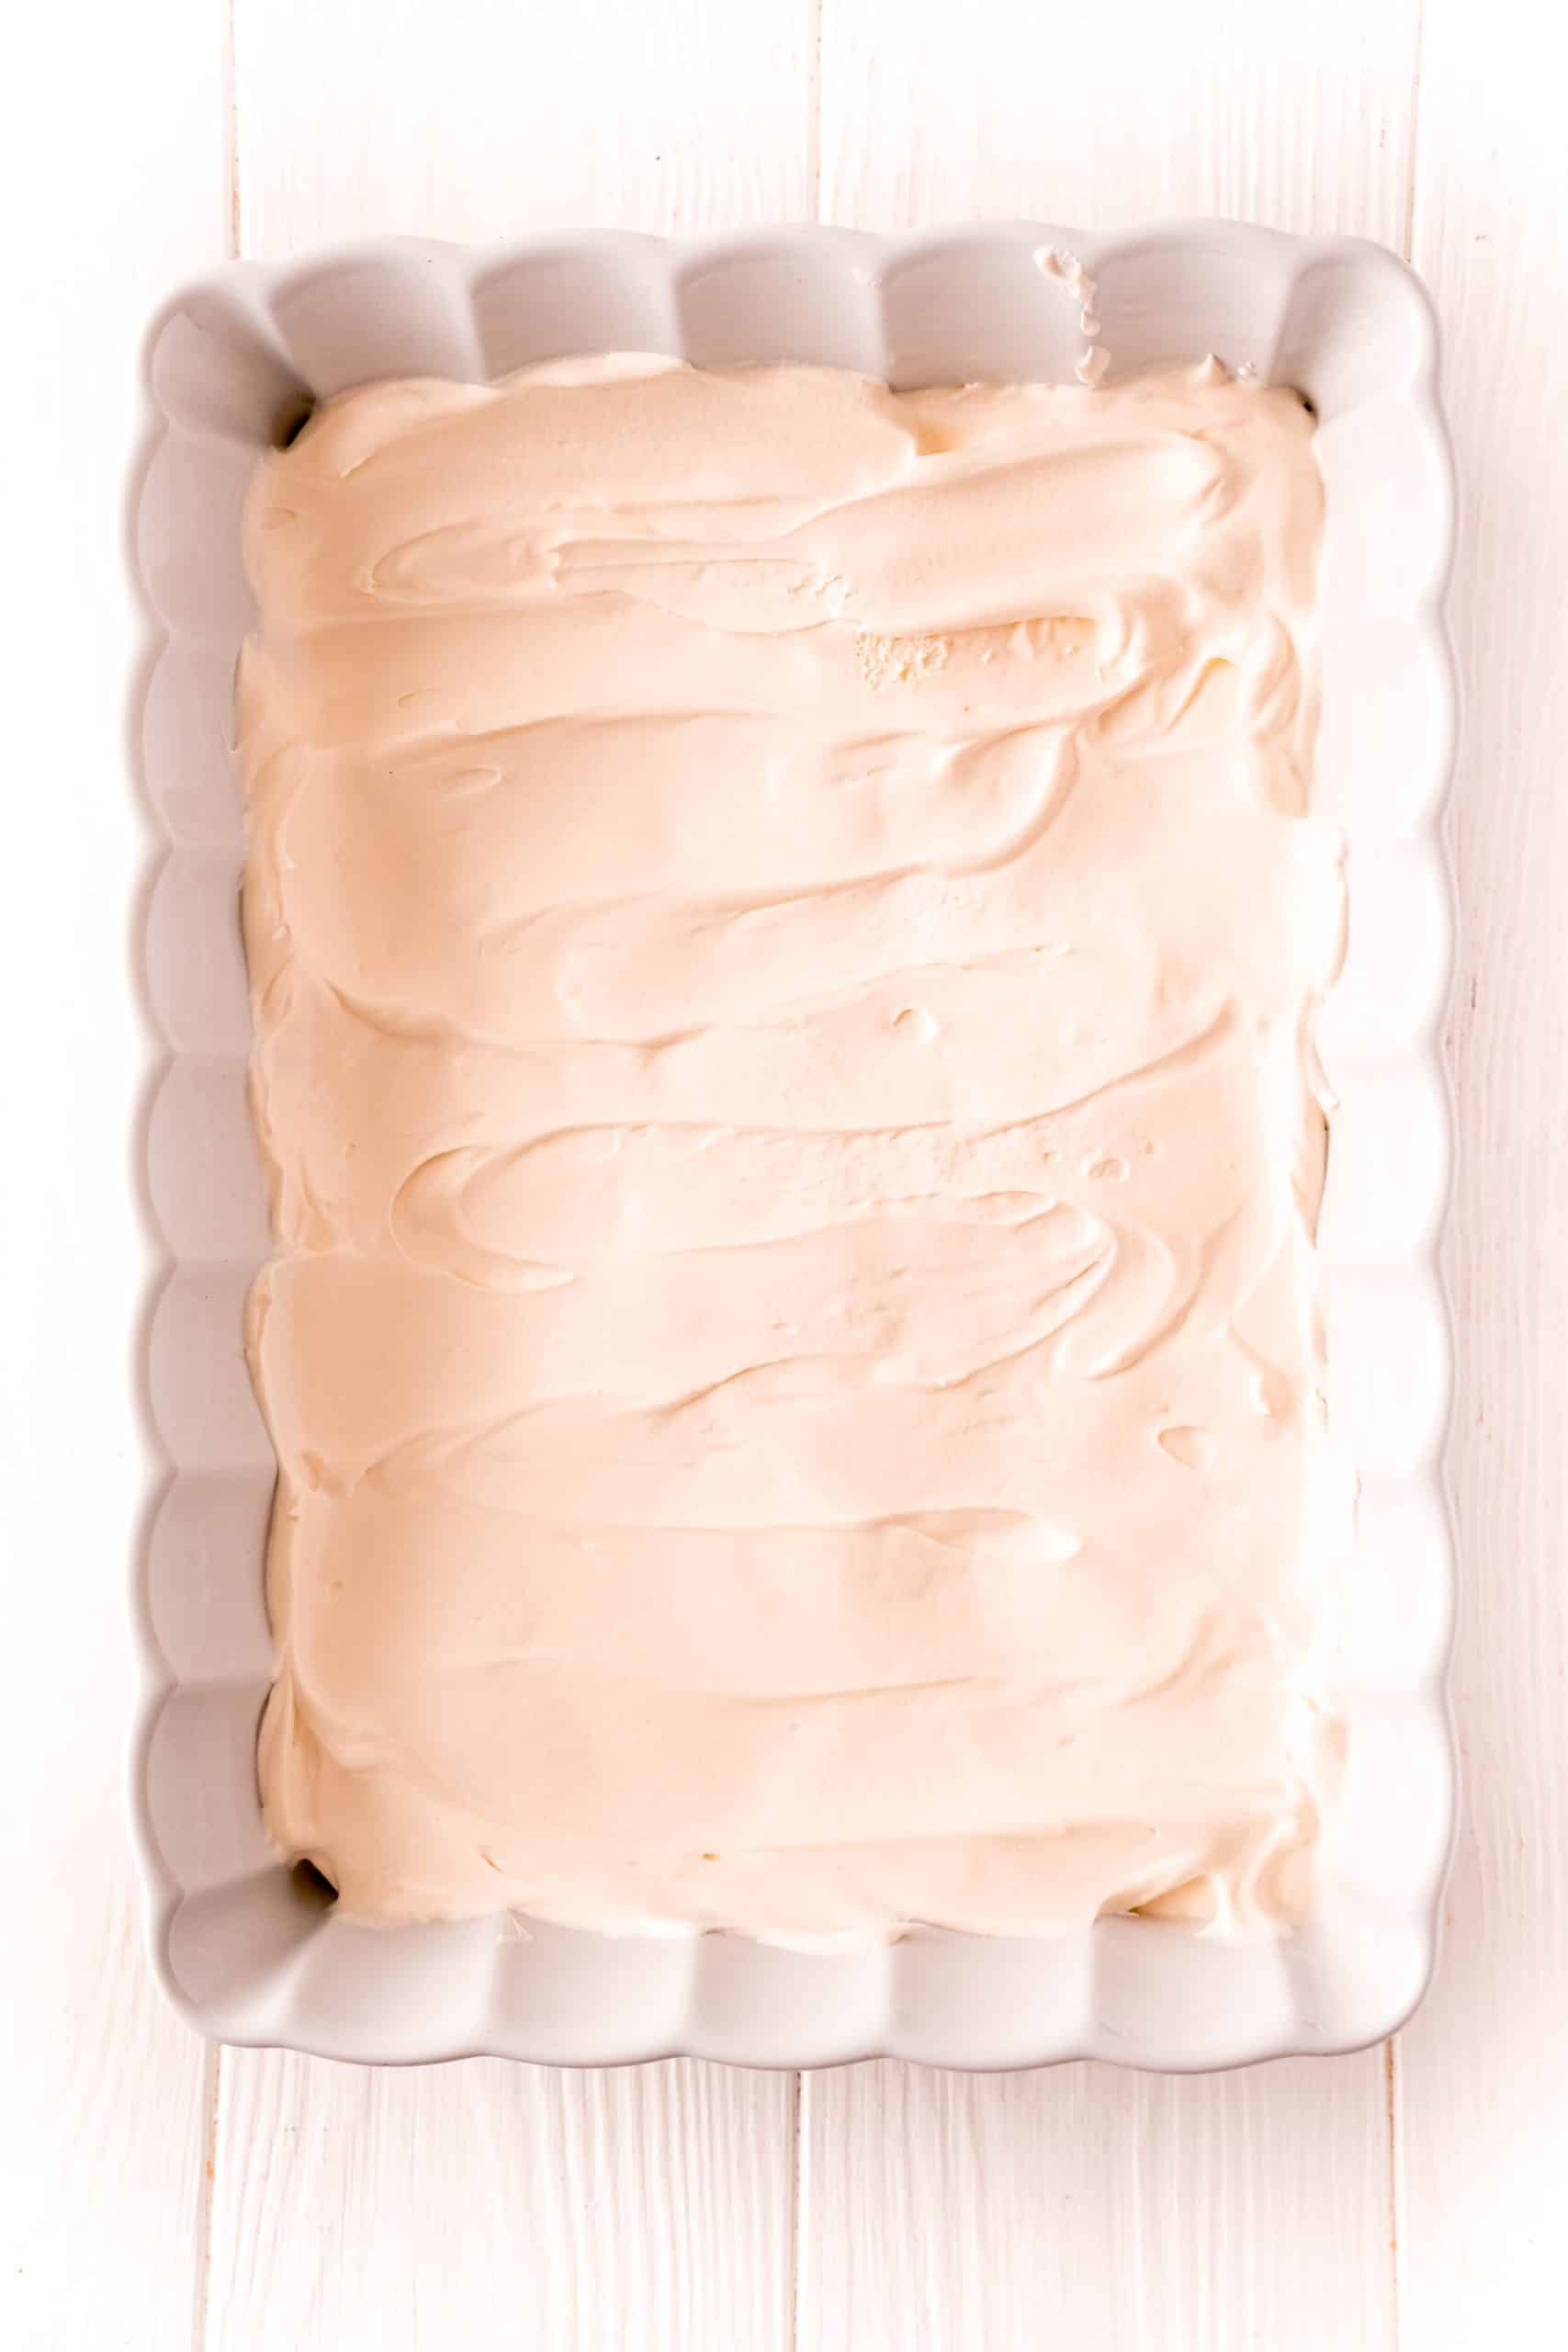 Whipped topping layered evenly over over sweetened condensed milk layer.